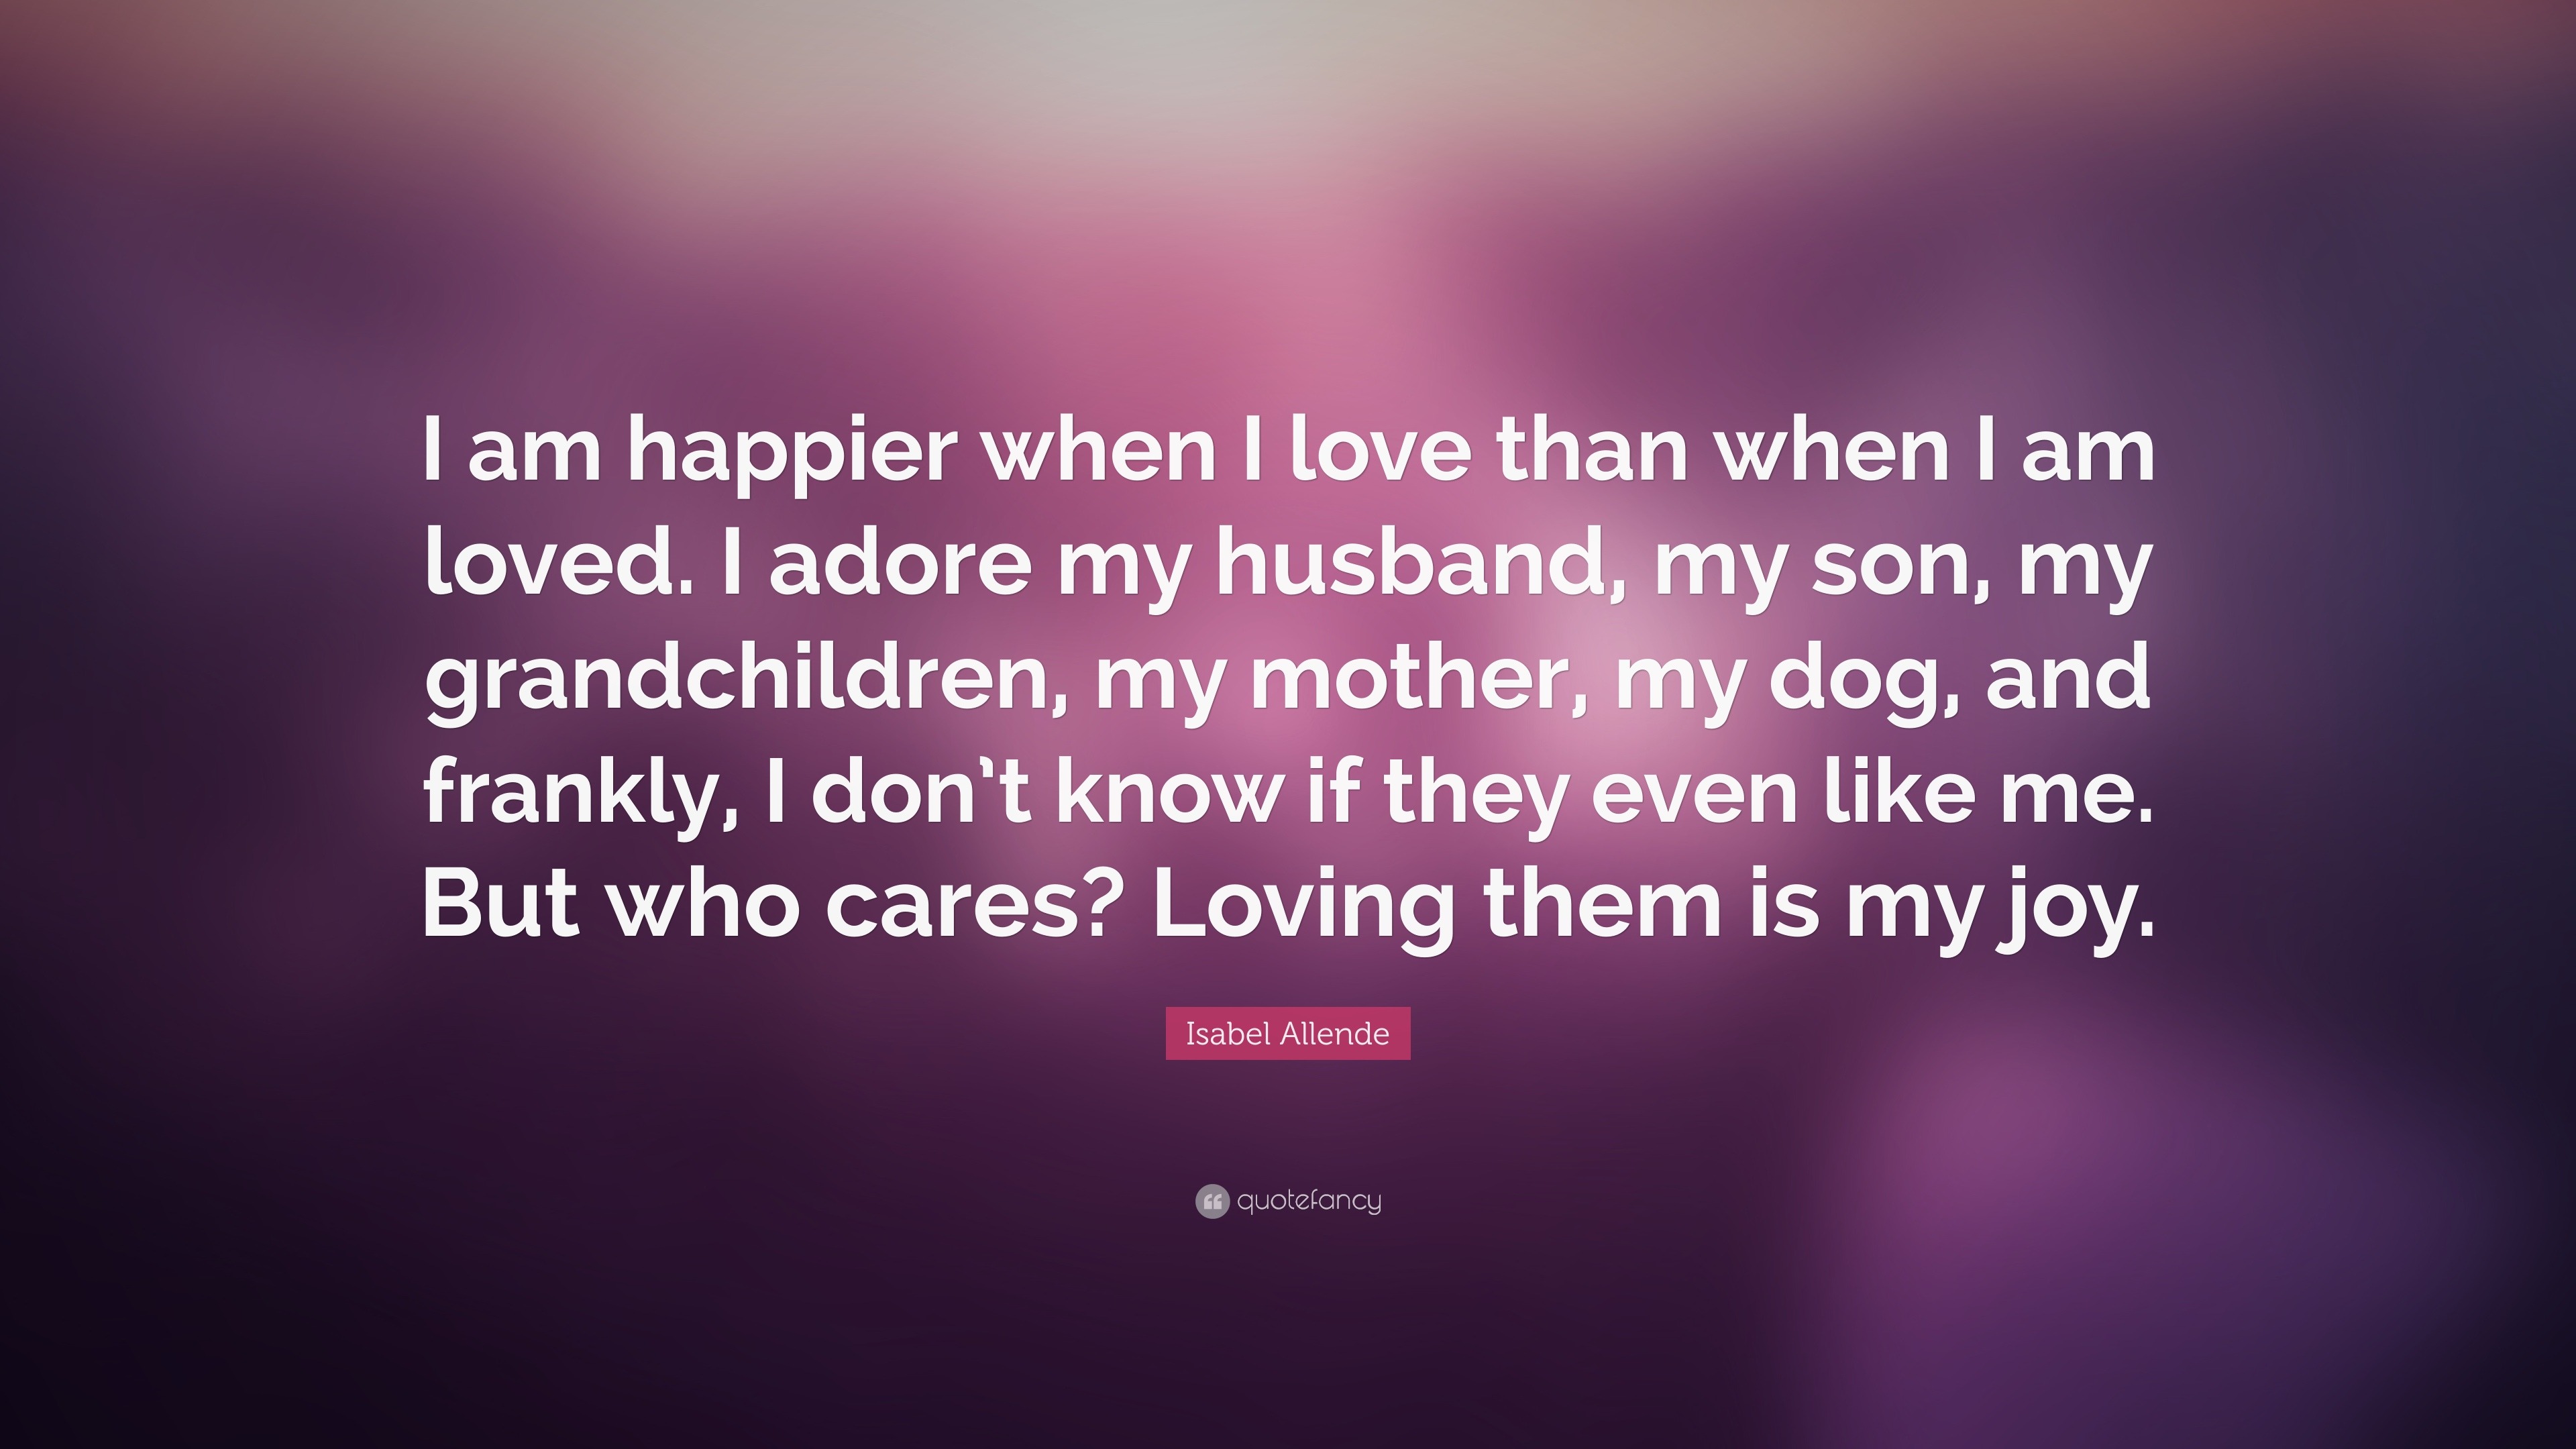 Isabel Allende Quote: "I am happier when I love than when ...